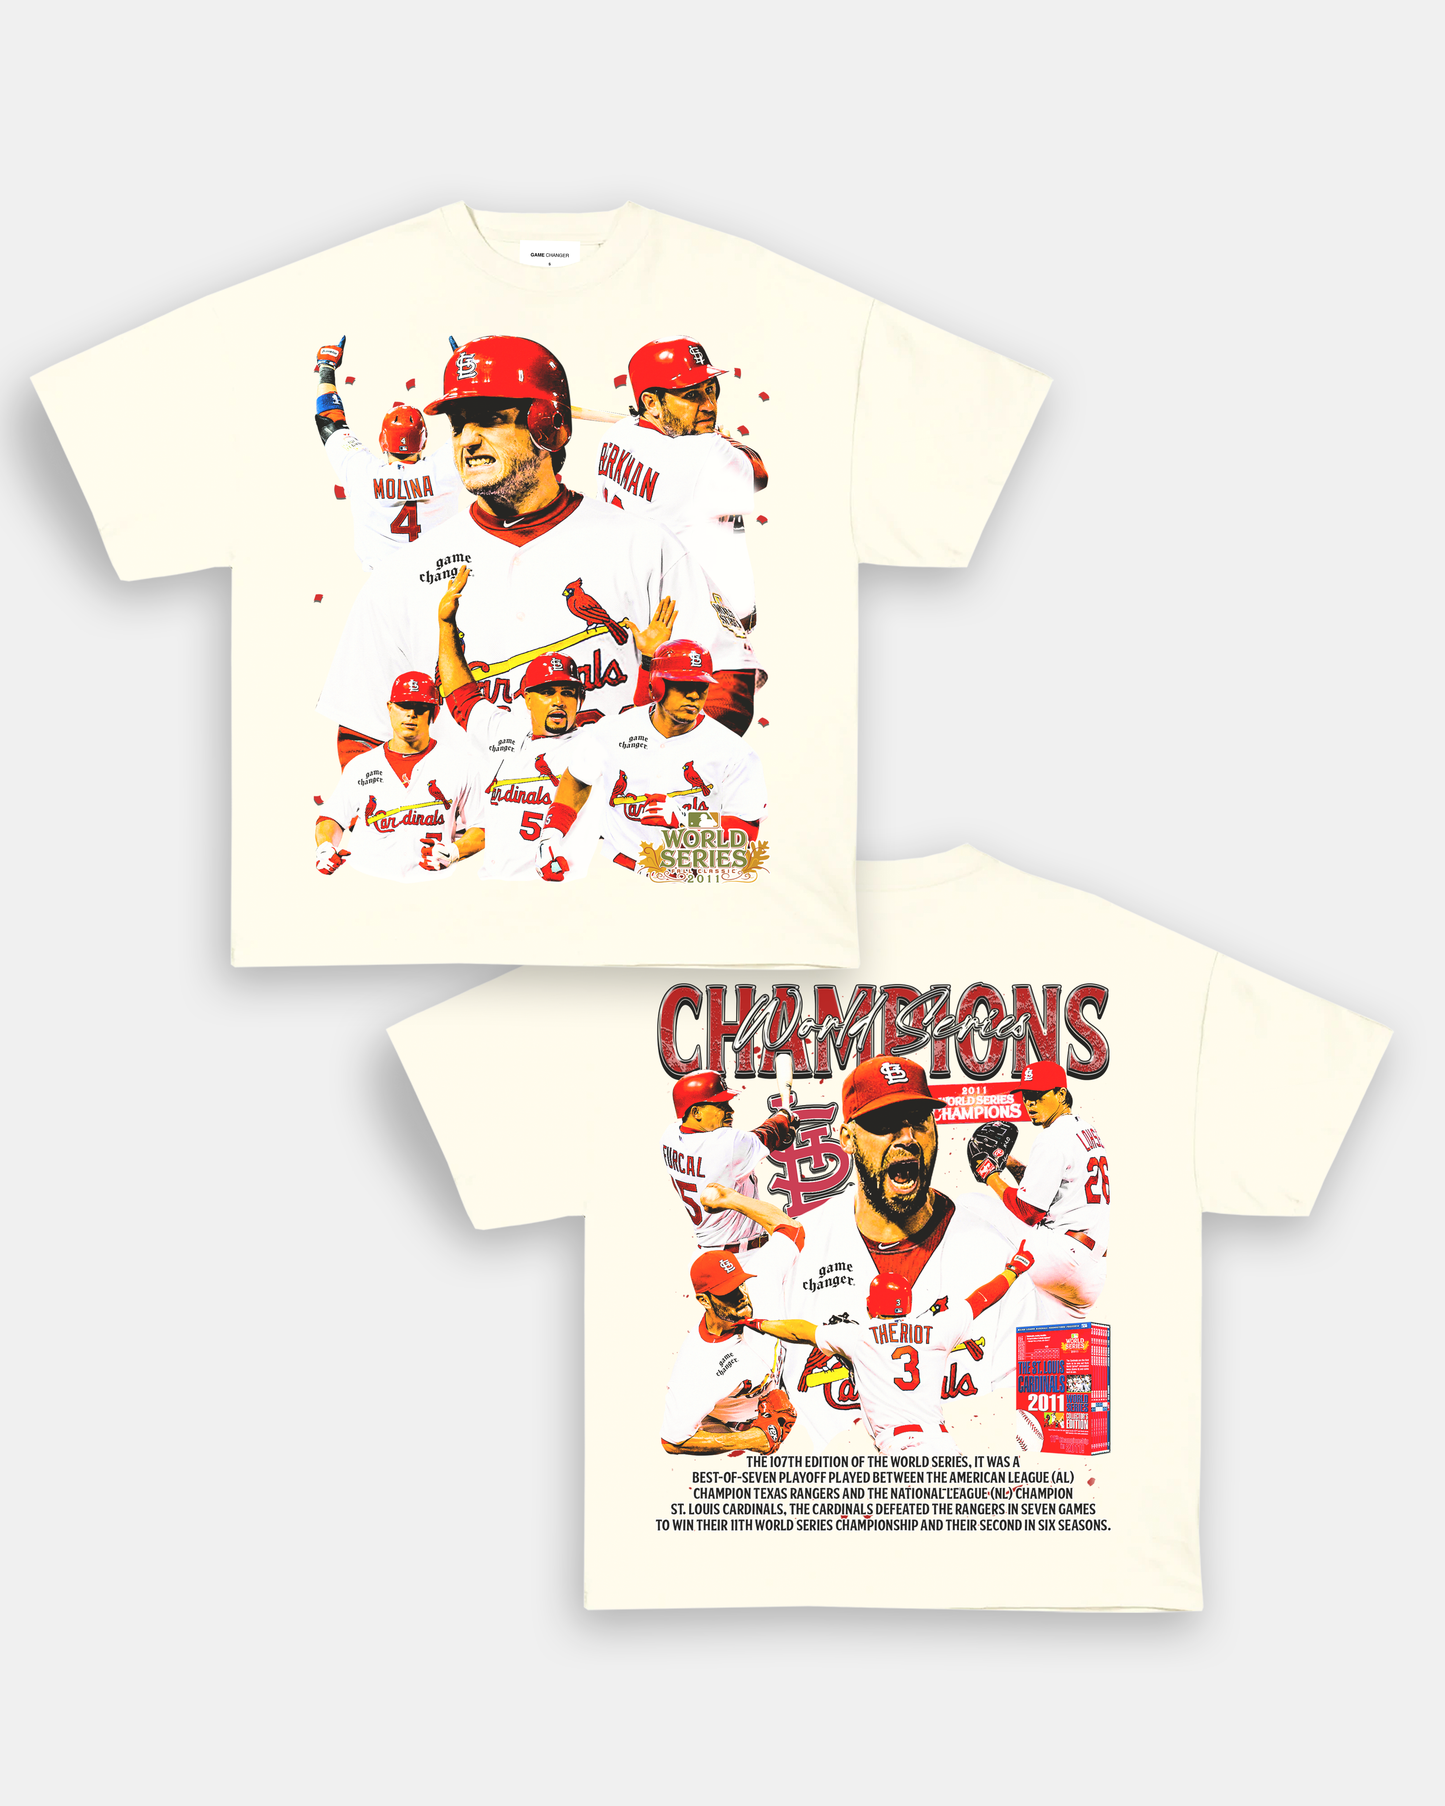 2011 WORLD SERIES CHAMPS - CARDINALS TEE - [DS]